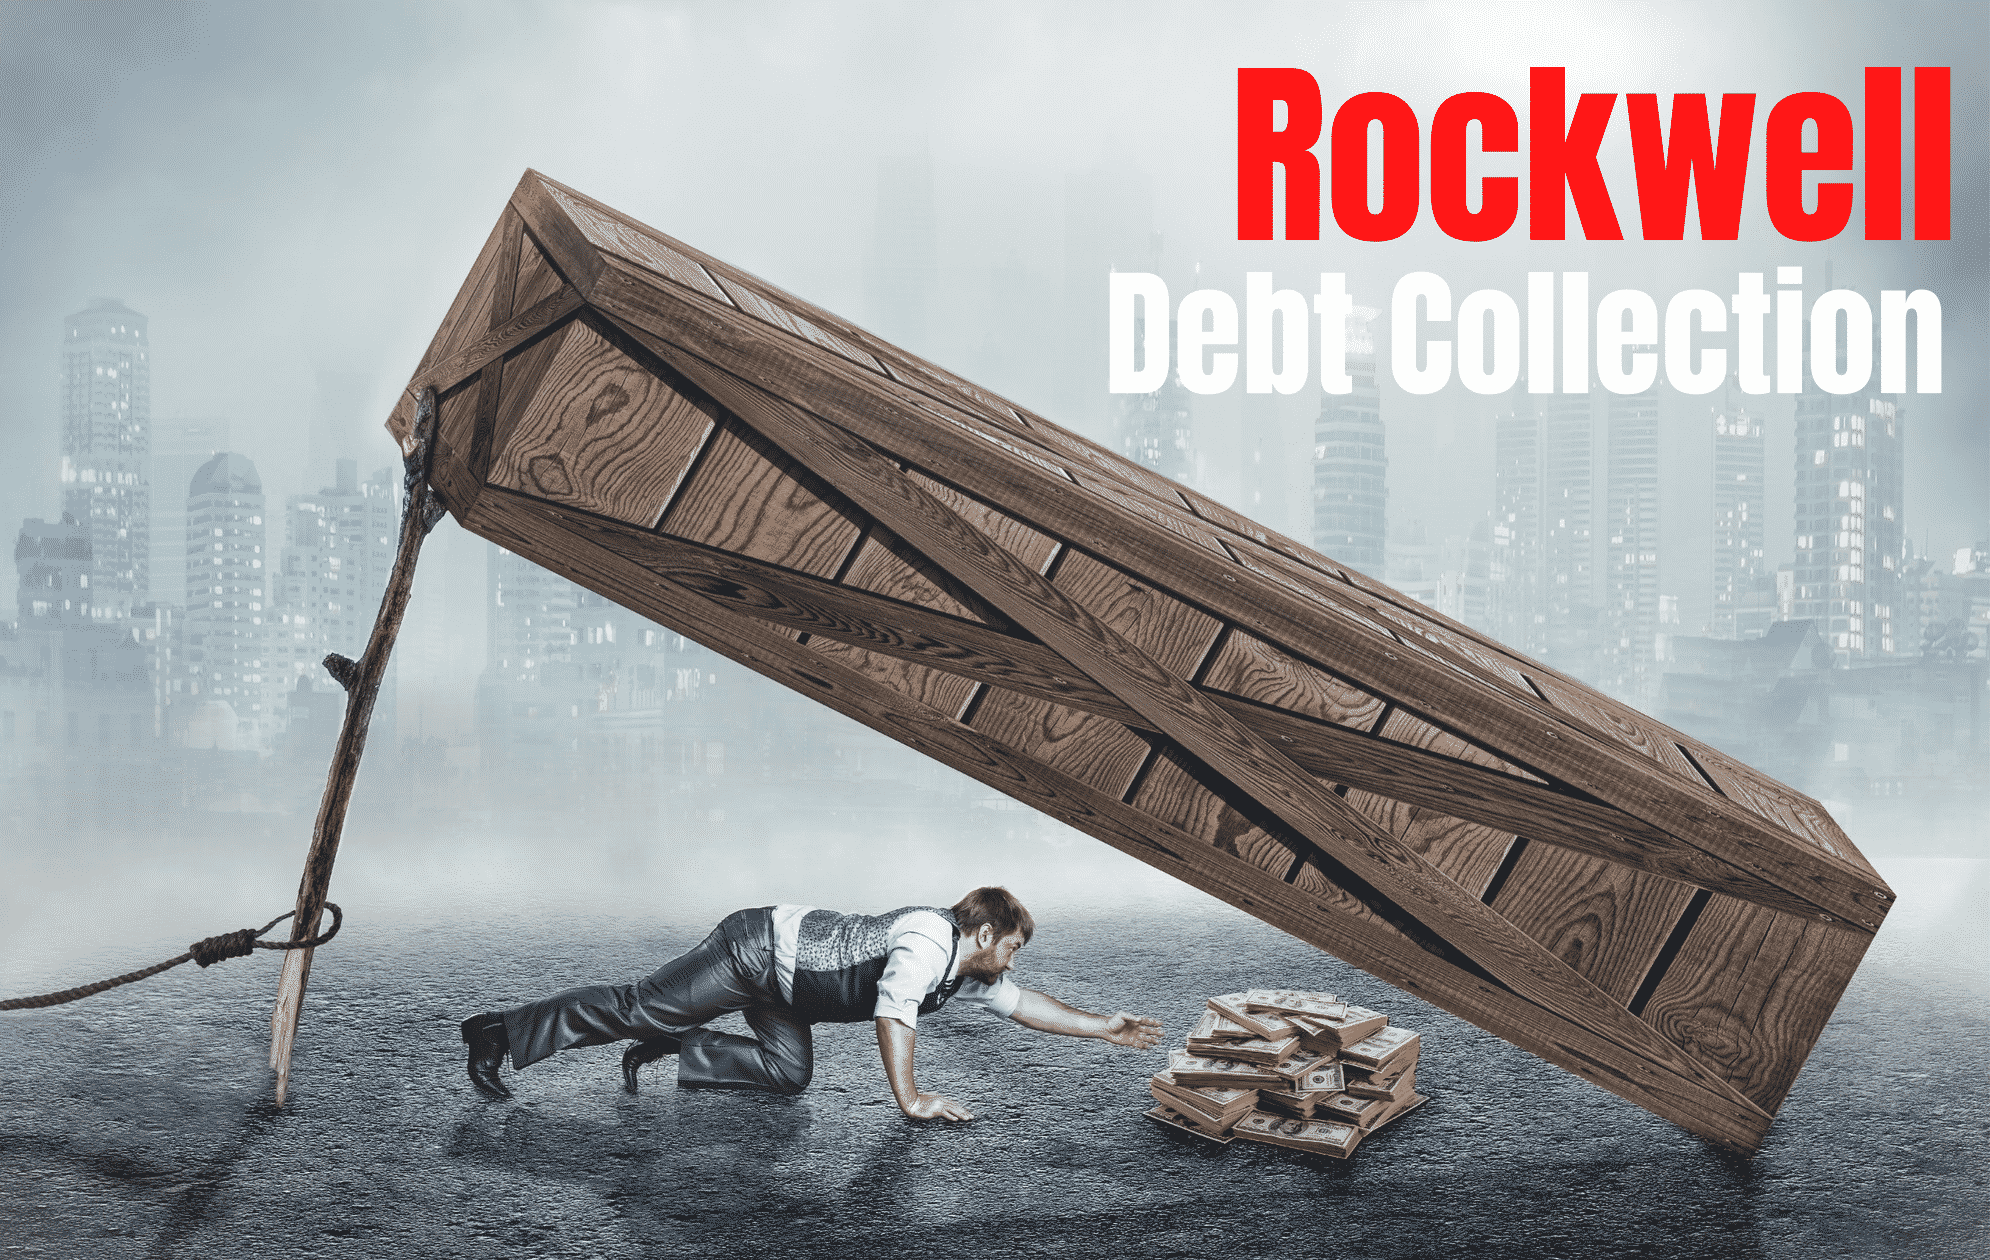 Rockwell-debt-collection